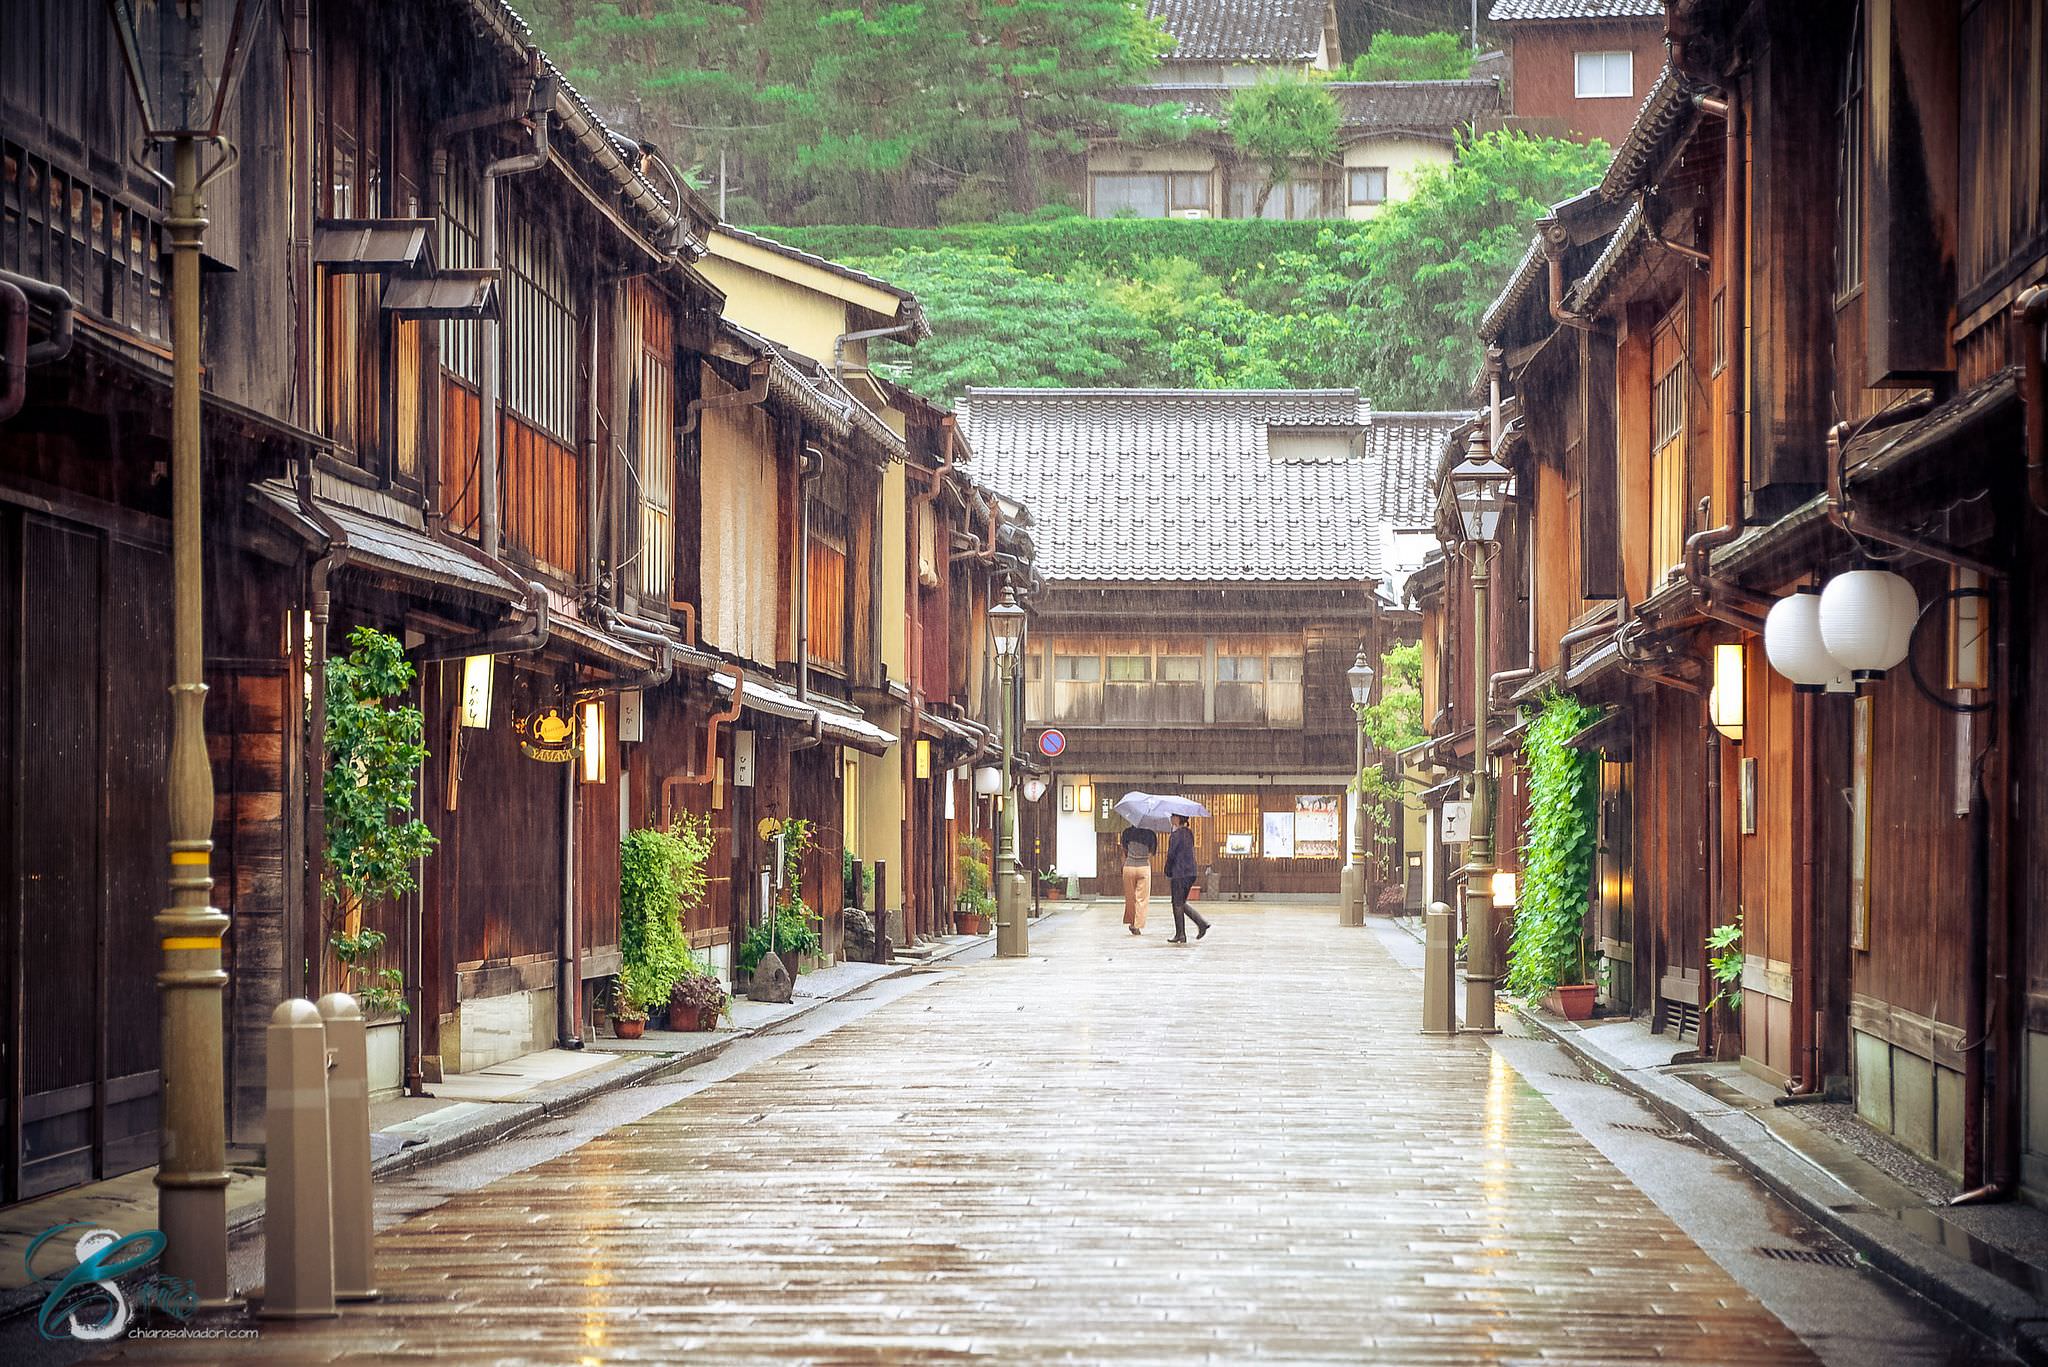 The most exciting 8 night Japan honeymoon itinerary